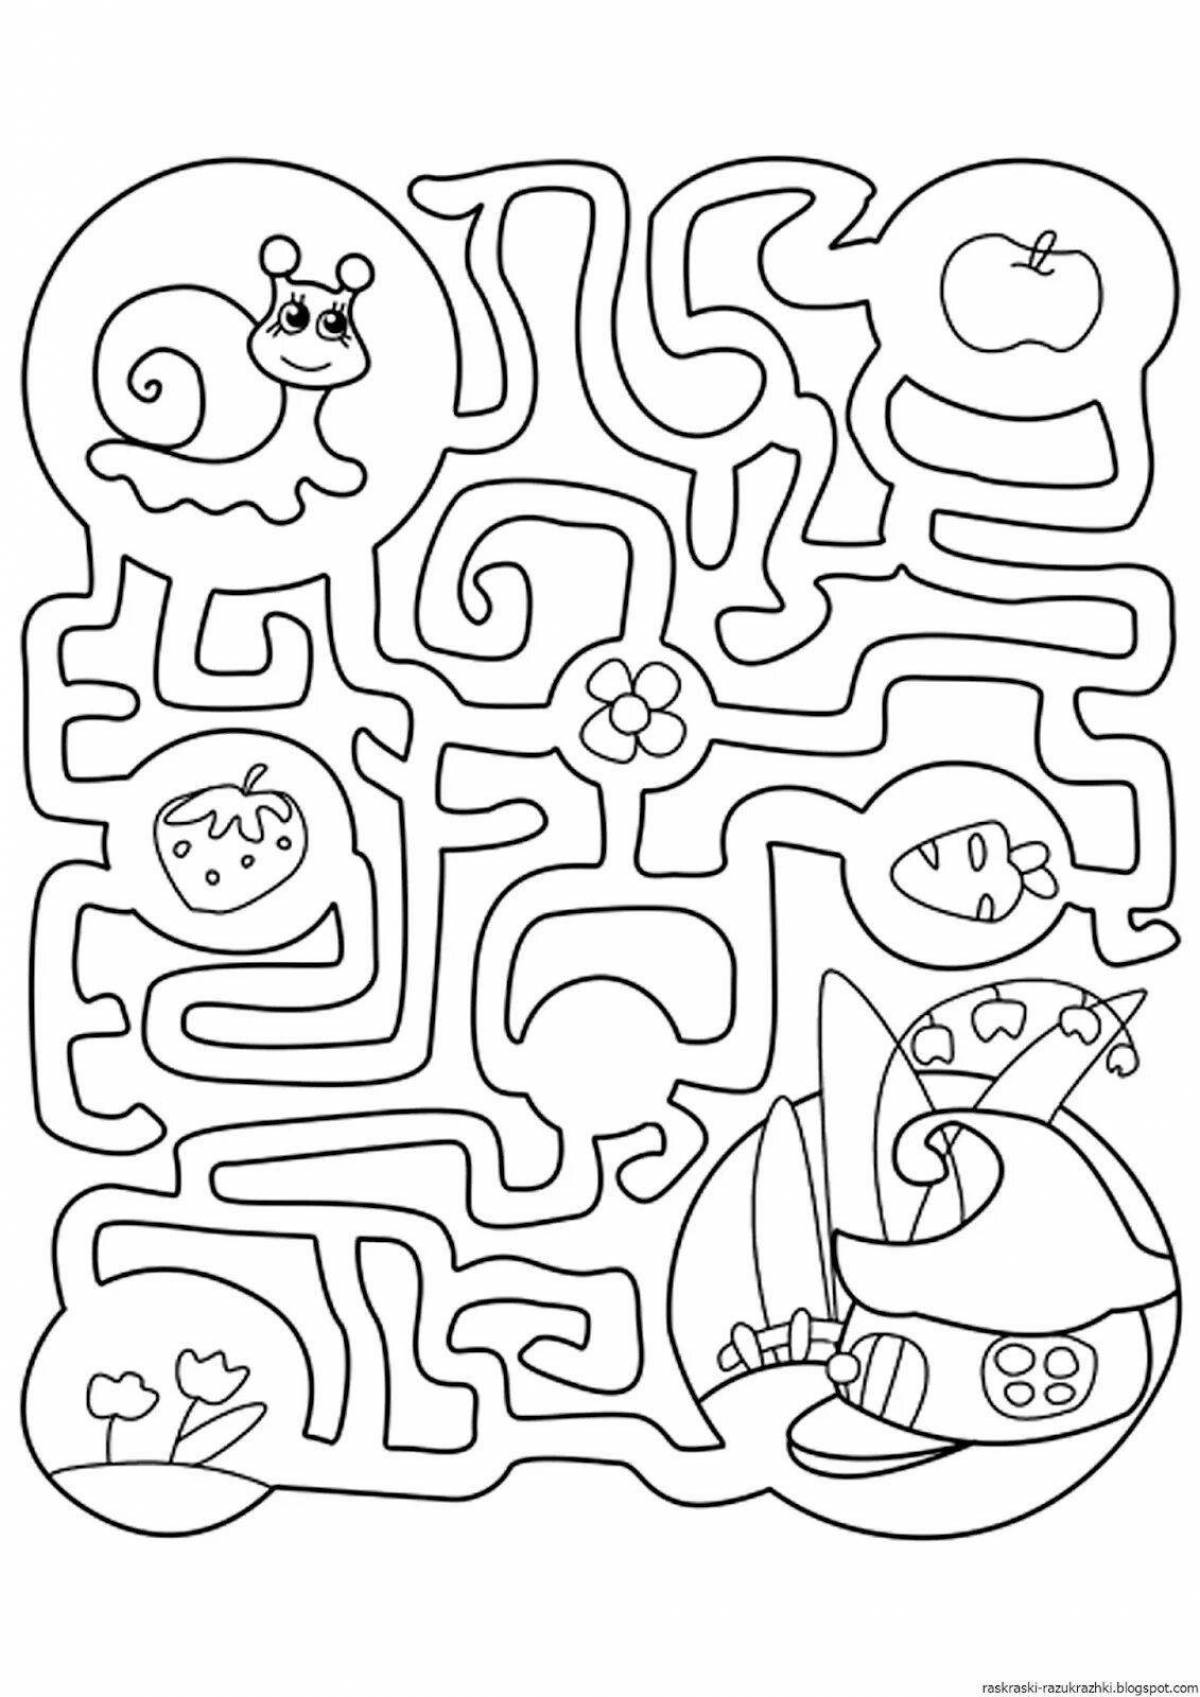 Mazes for children 6 7 years old #18